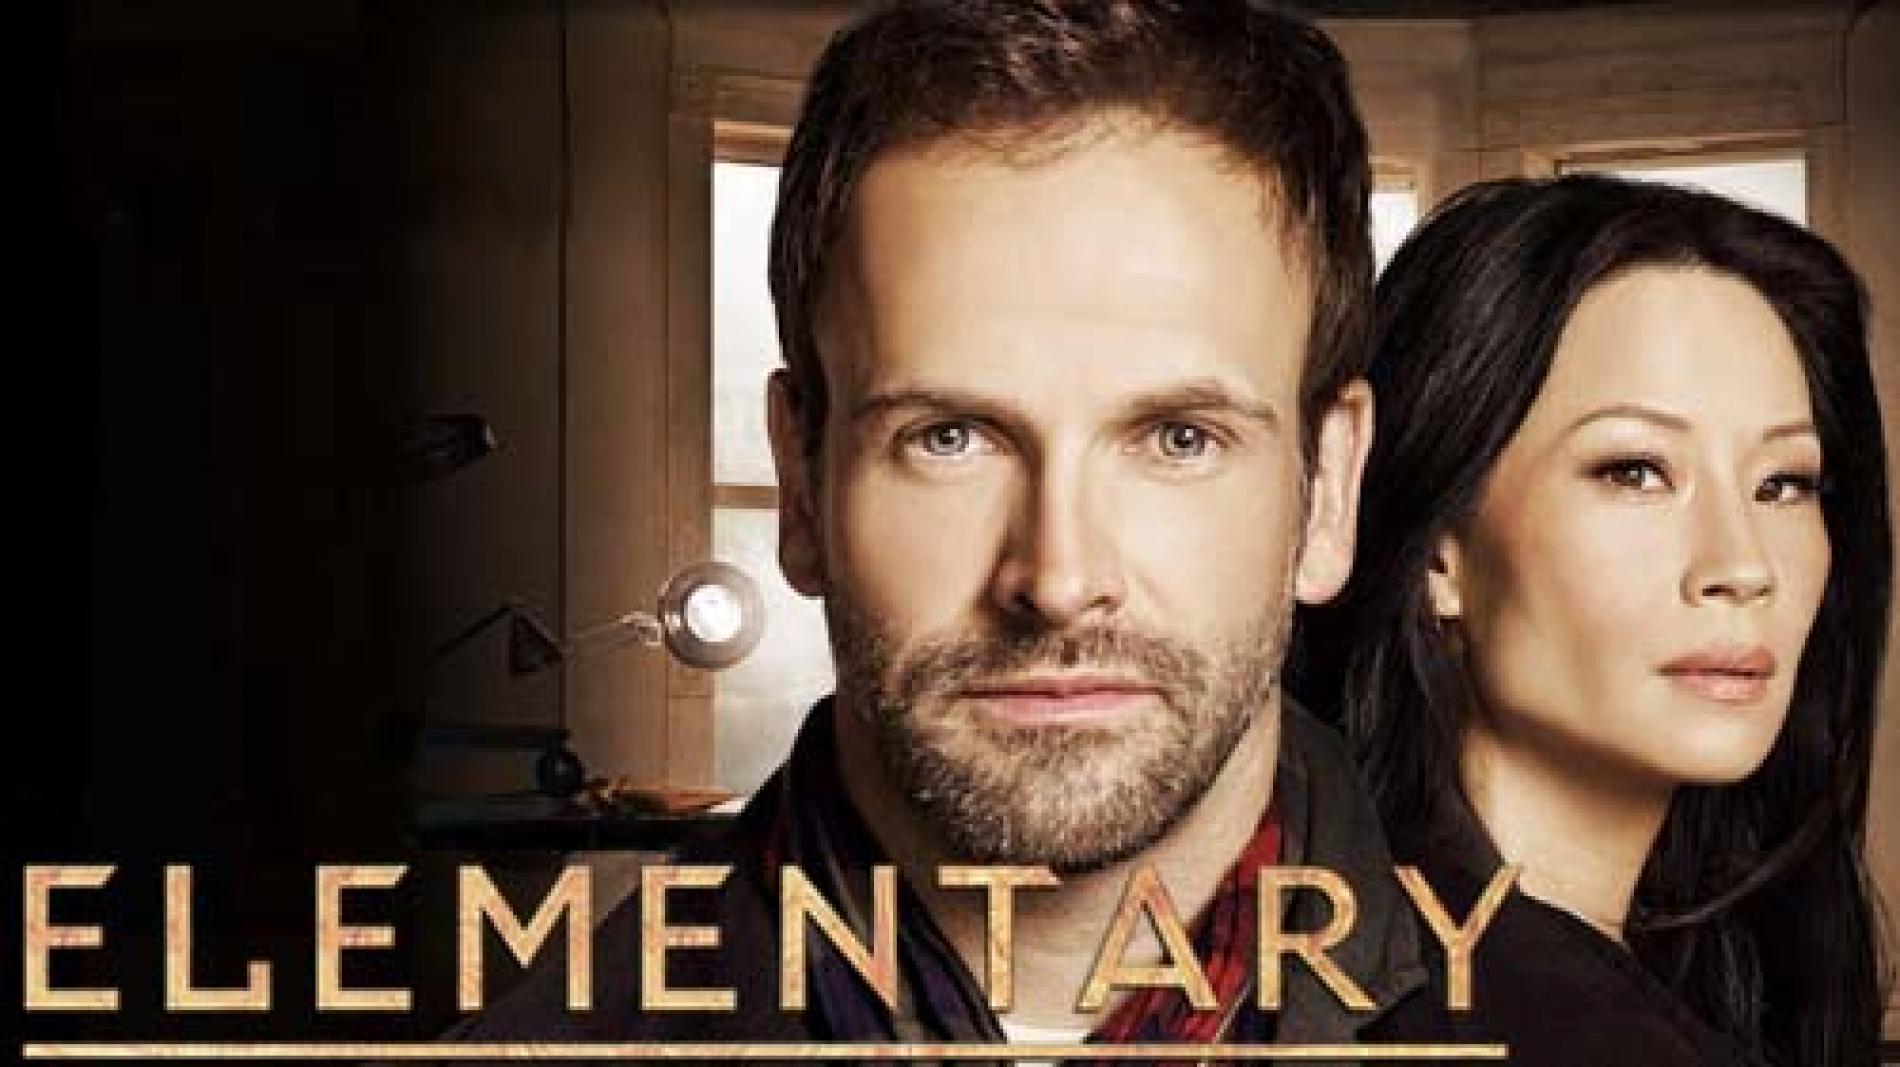 Producer Clarence Jey Has Work Featured On The US Tv Show ‘Elementary’